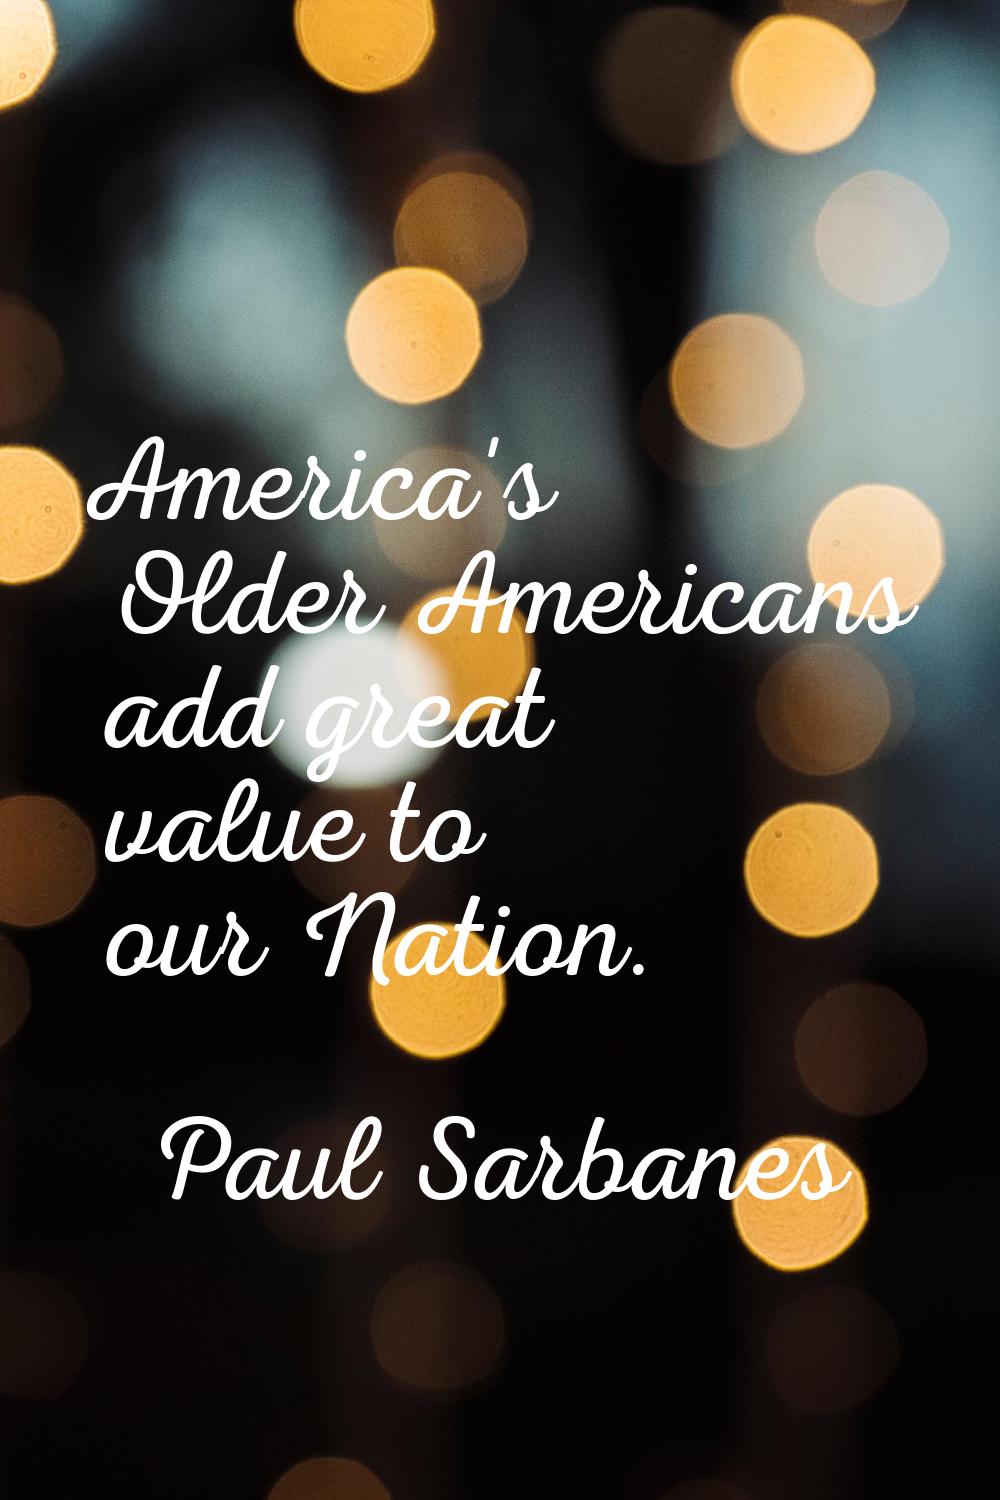 America's Older Americans add great value to our Nation.